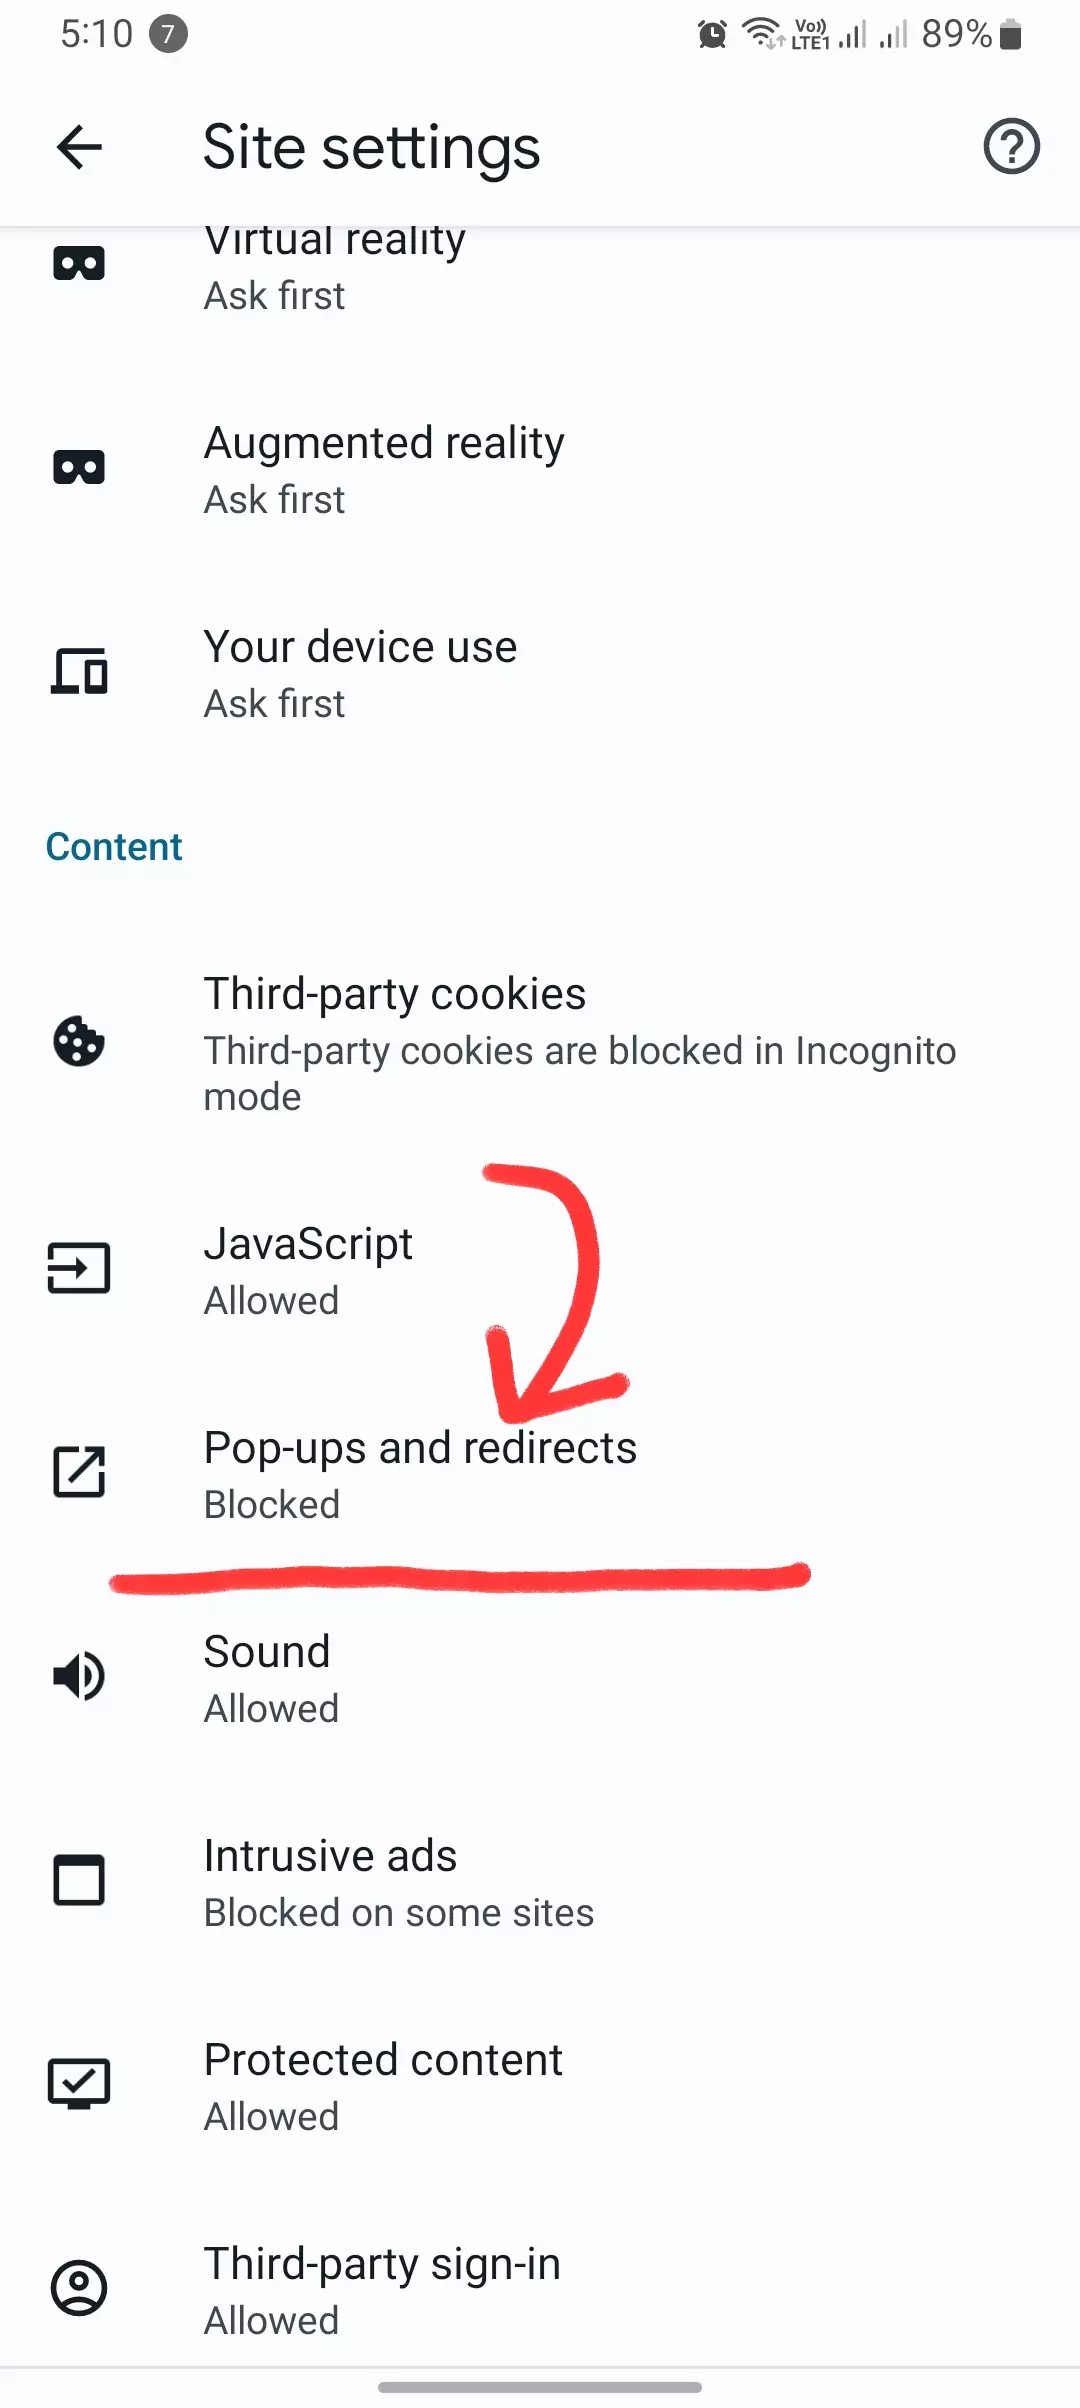 chrome app site settings highlighting popups and redirects